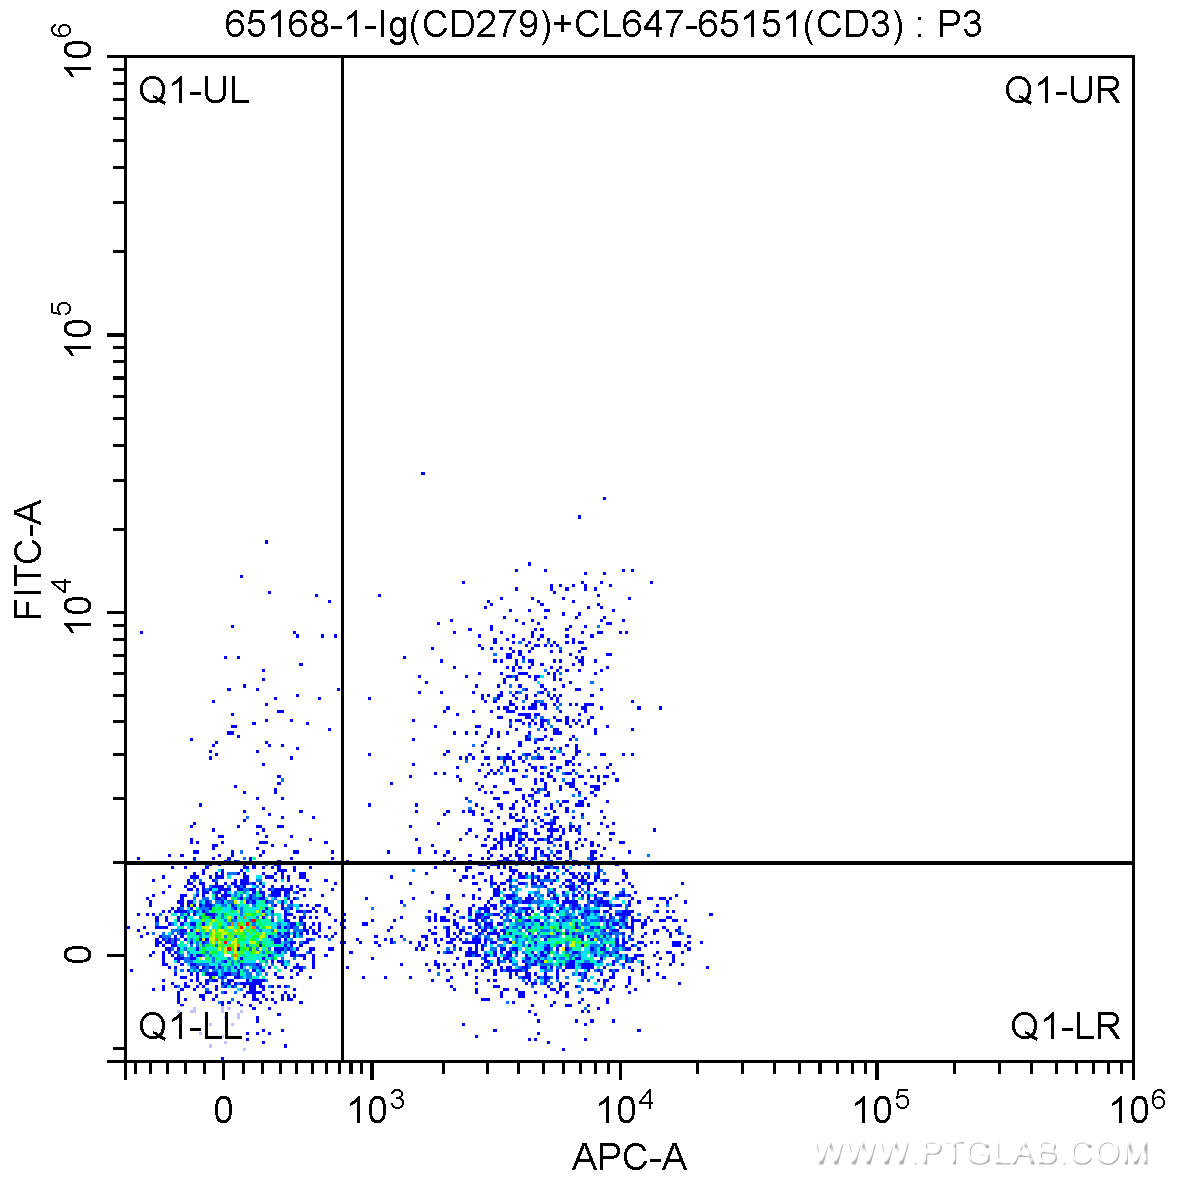 1X10^6 human peripheral blood mononuclear cells (PBMCs) were surface stained with CoraLite®647-conjugated Anti-Human CD3 (CL647-65151, Clone: UCHT1), 0.25 ug Anti-Human CD279 (65168-1-Ig, Clone: EH12.2H7) and CoraLite®488-Conjugated AffiniPure Goat Anti-Mouse IgG(H+L) at dilution 1:1000. Cells were not fixed.